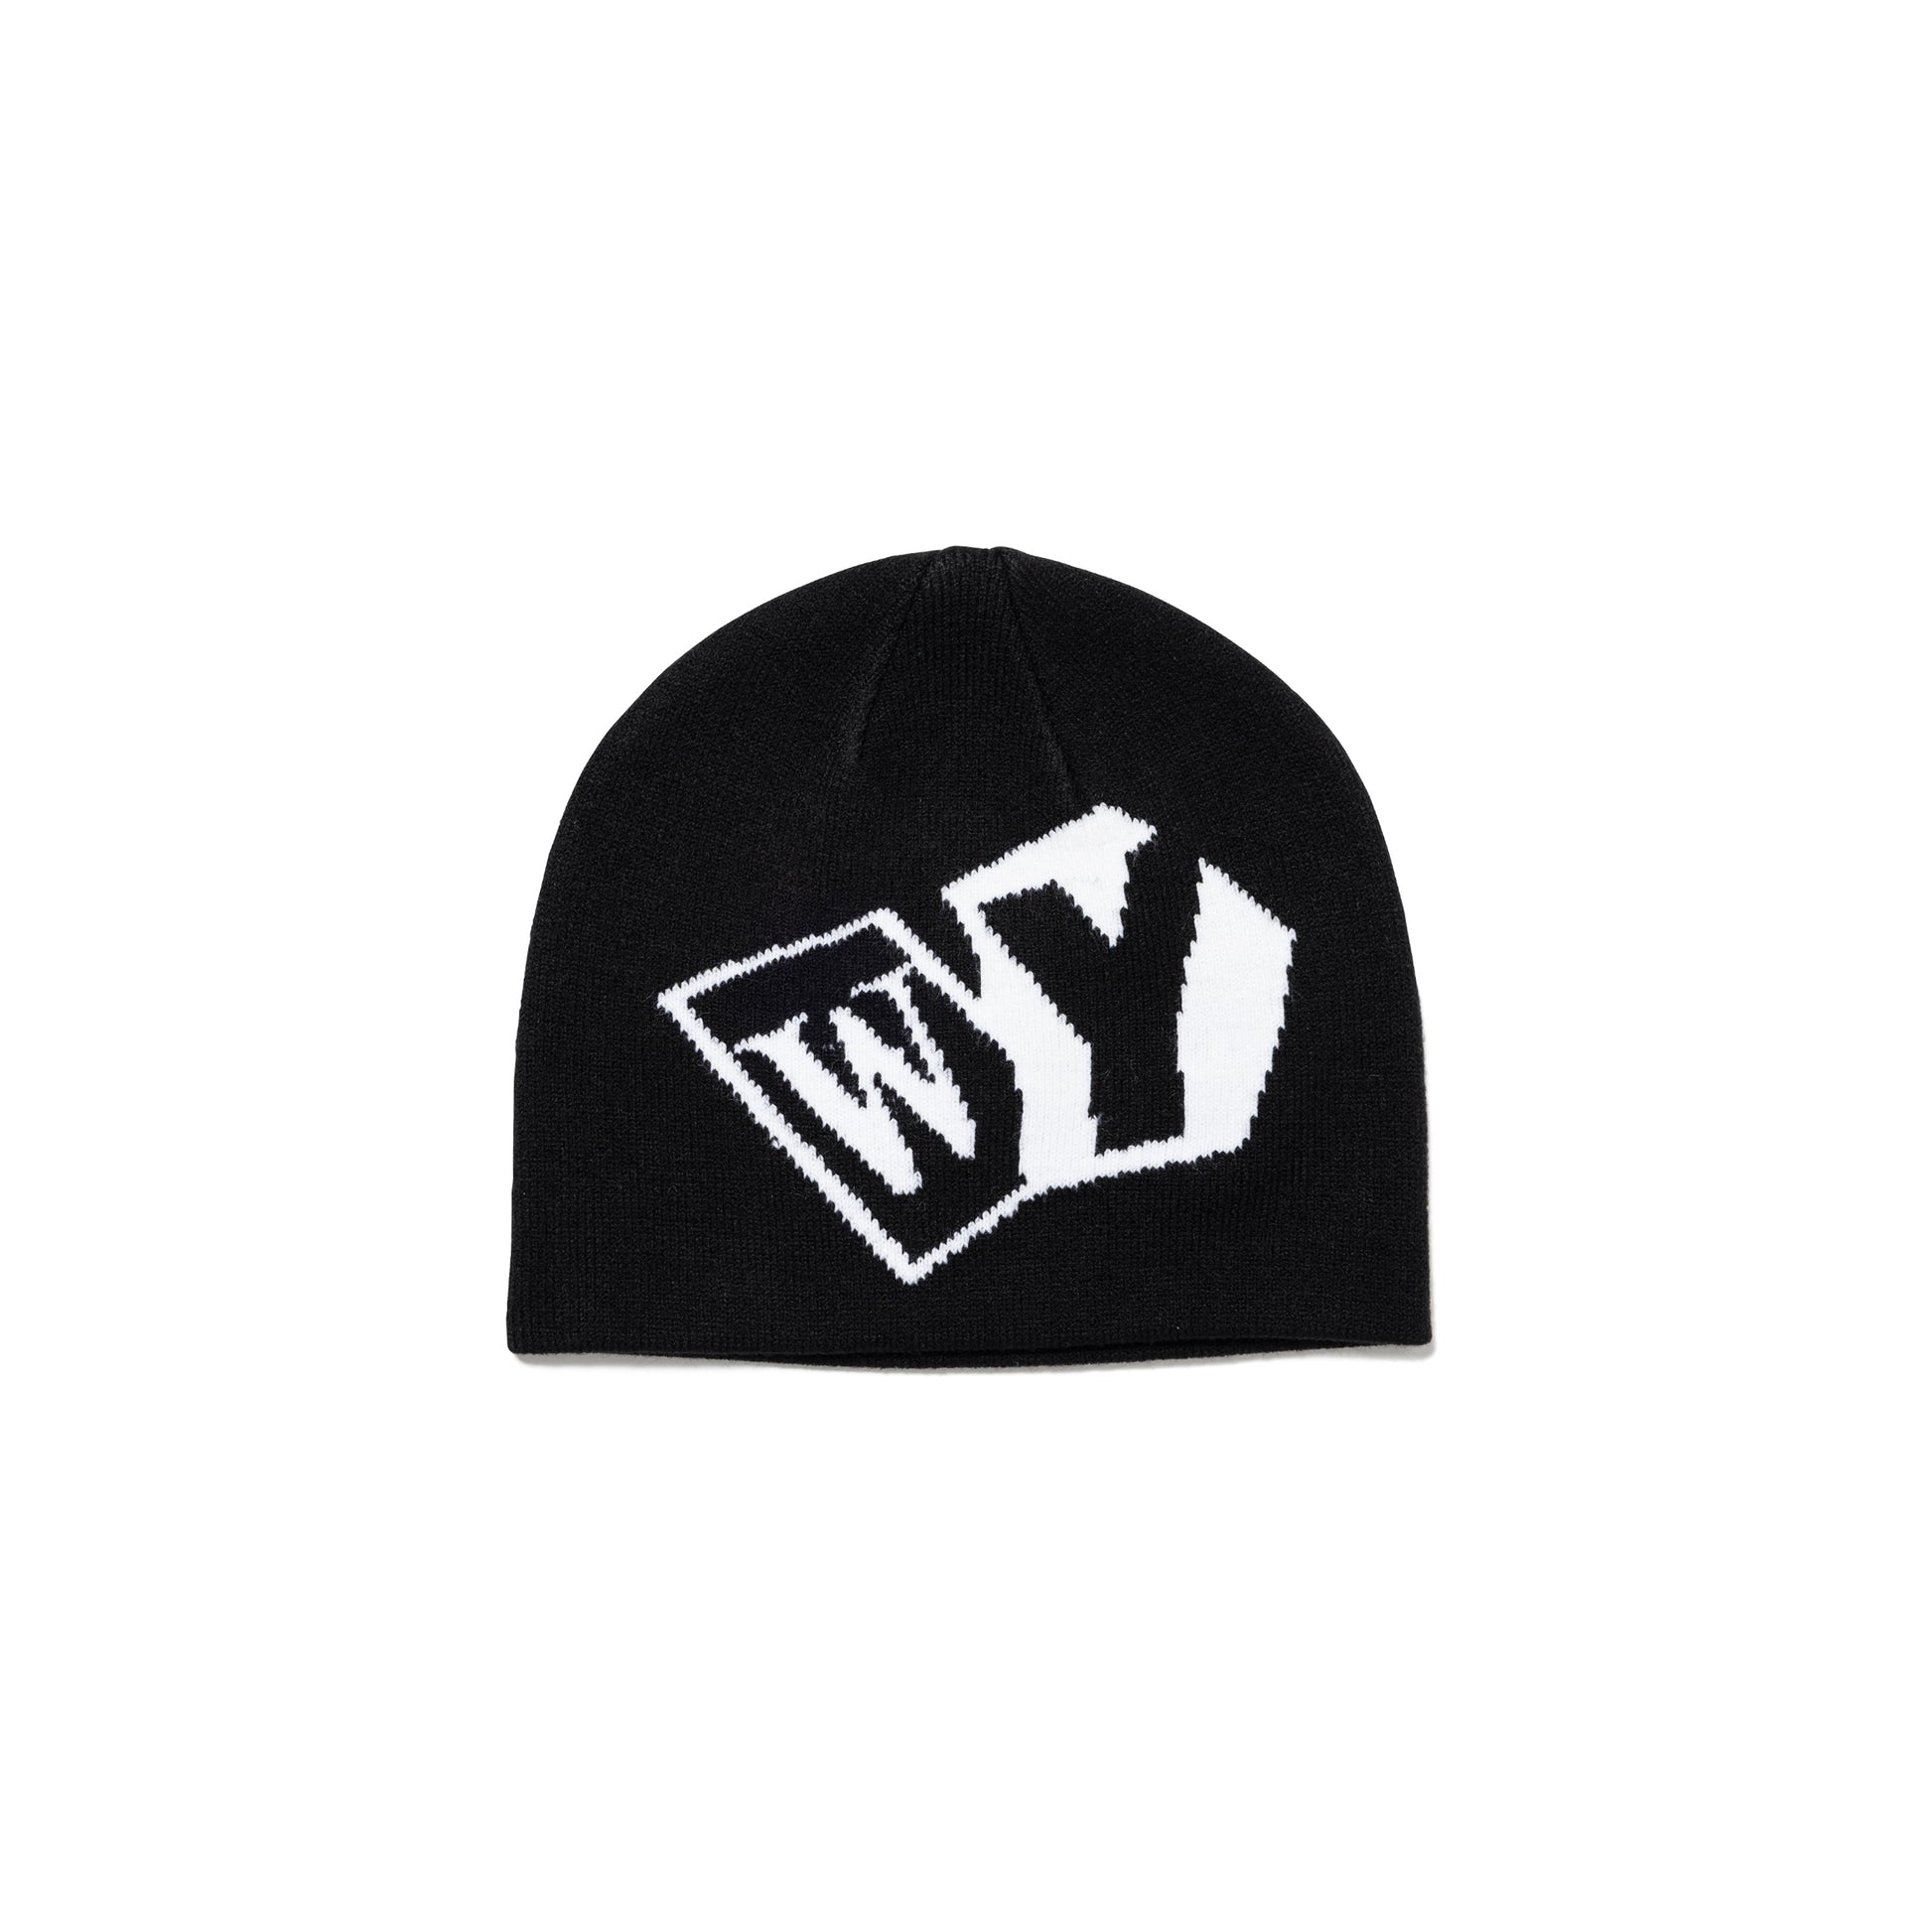 Wasted Youth WY Cap-Black